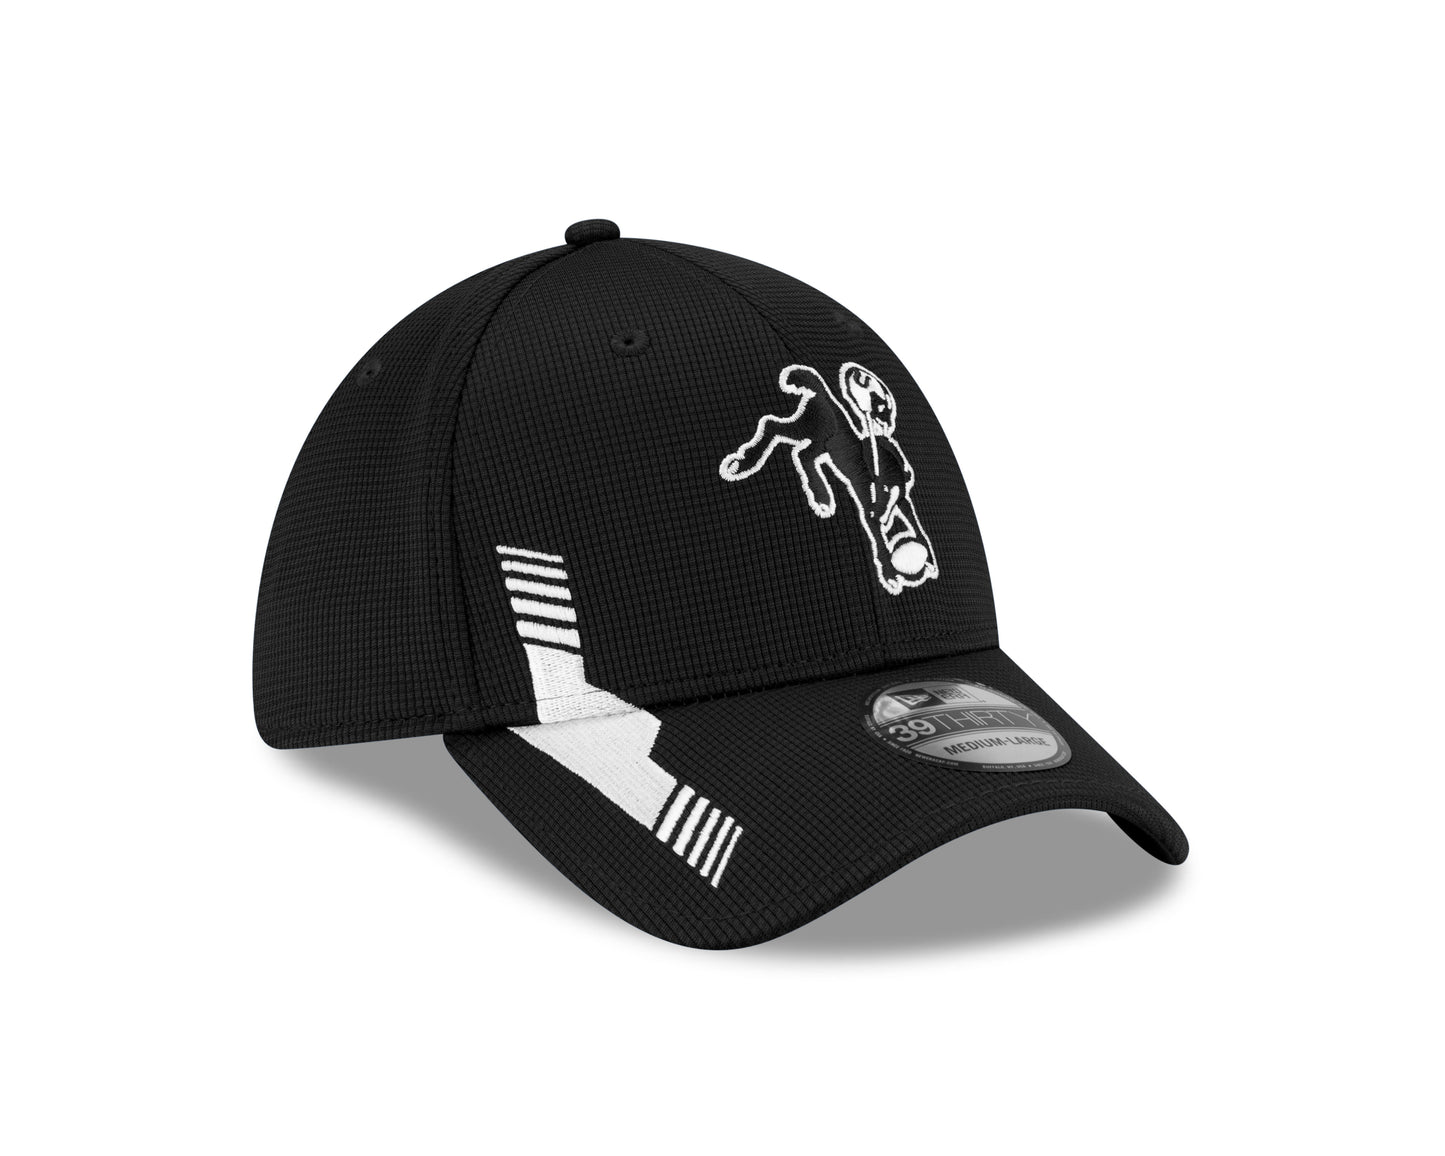 Indianapolis Colts New Era Sideline Black and White 39THIRTY Flex Hat